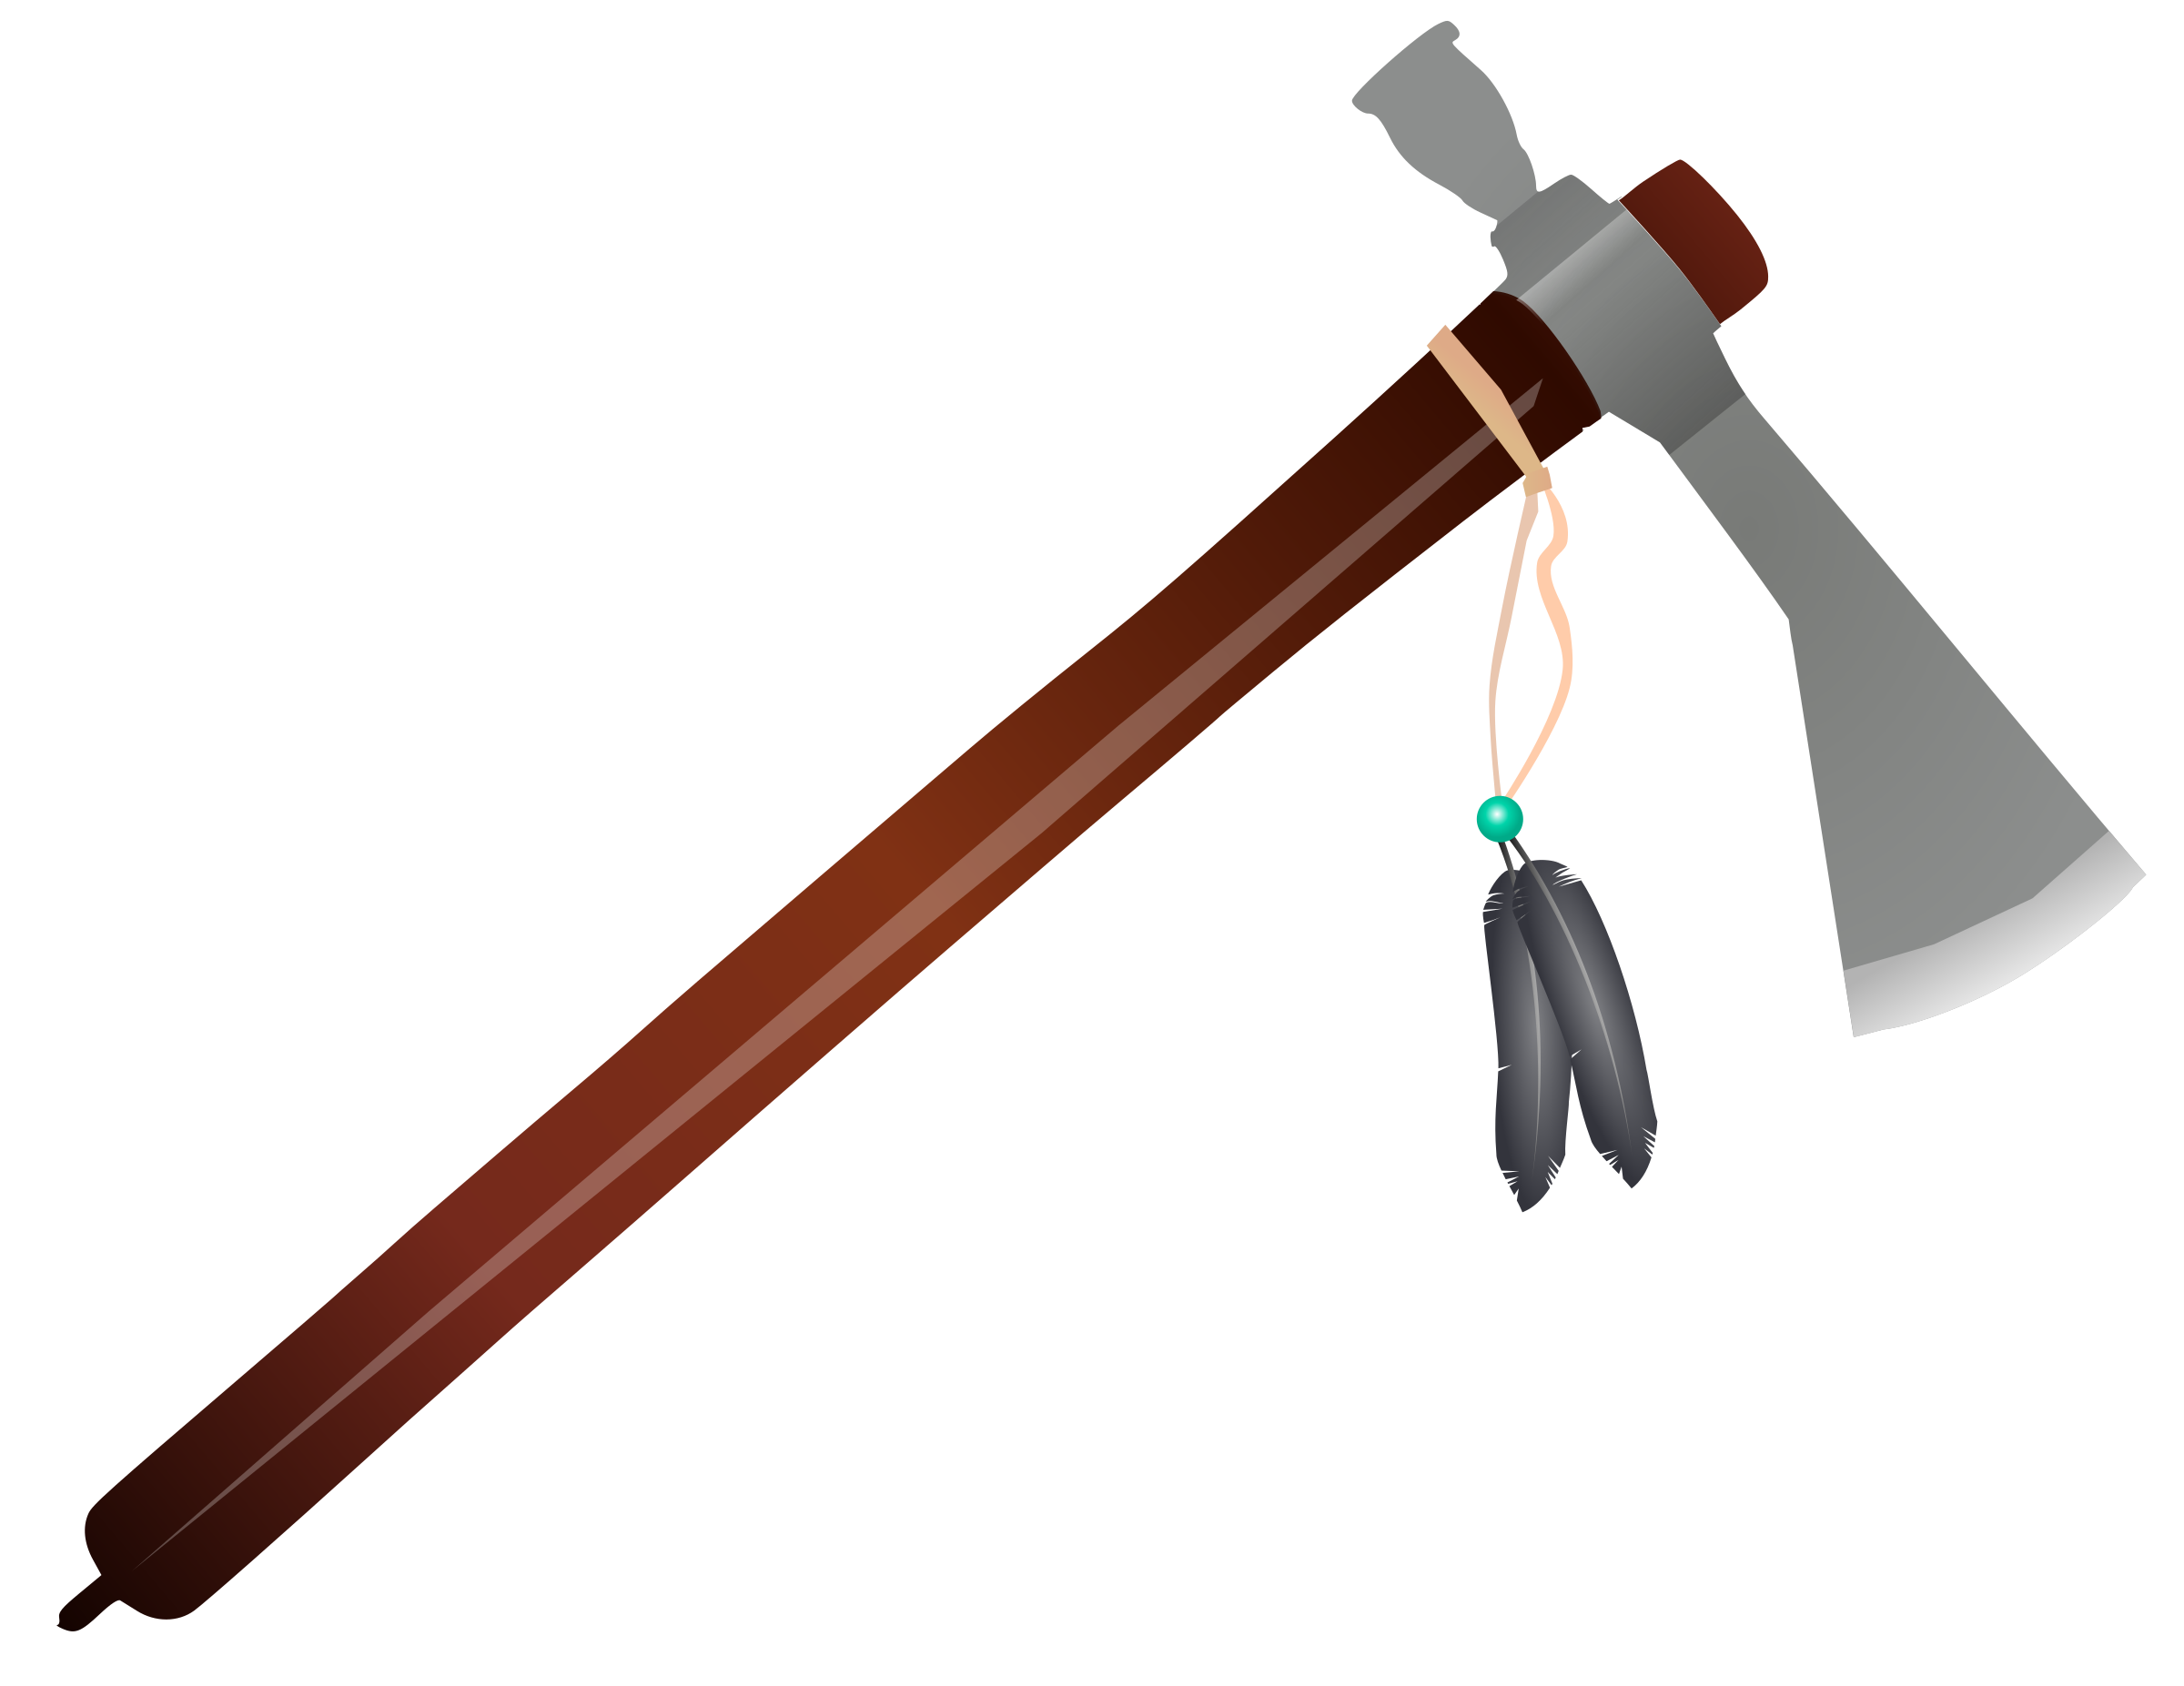 Indian clipart spear. Tomahawk image group